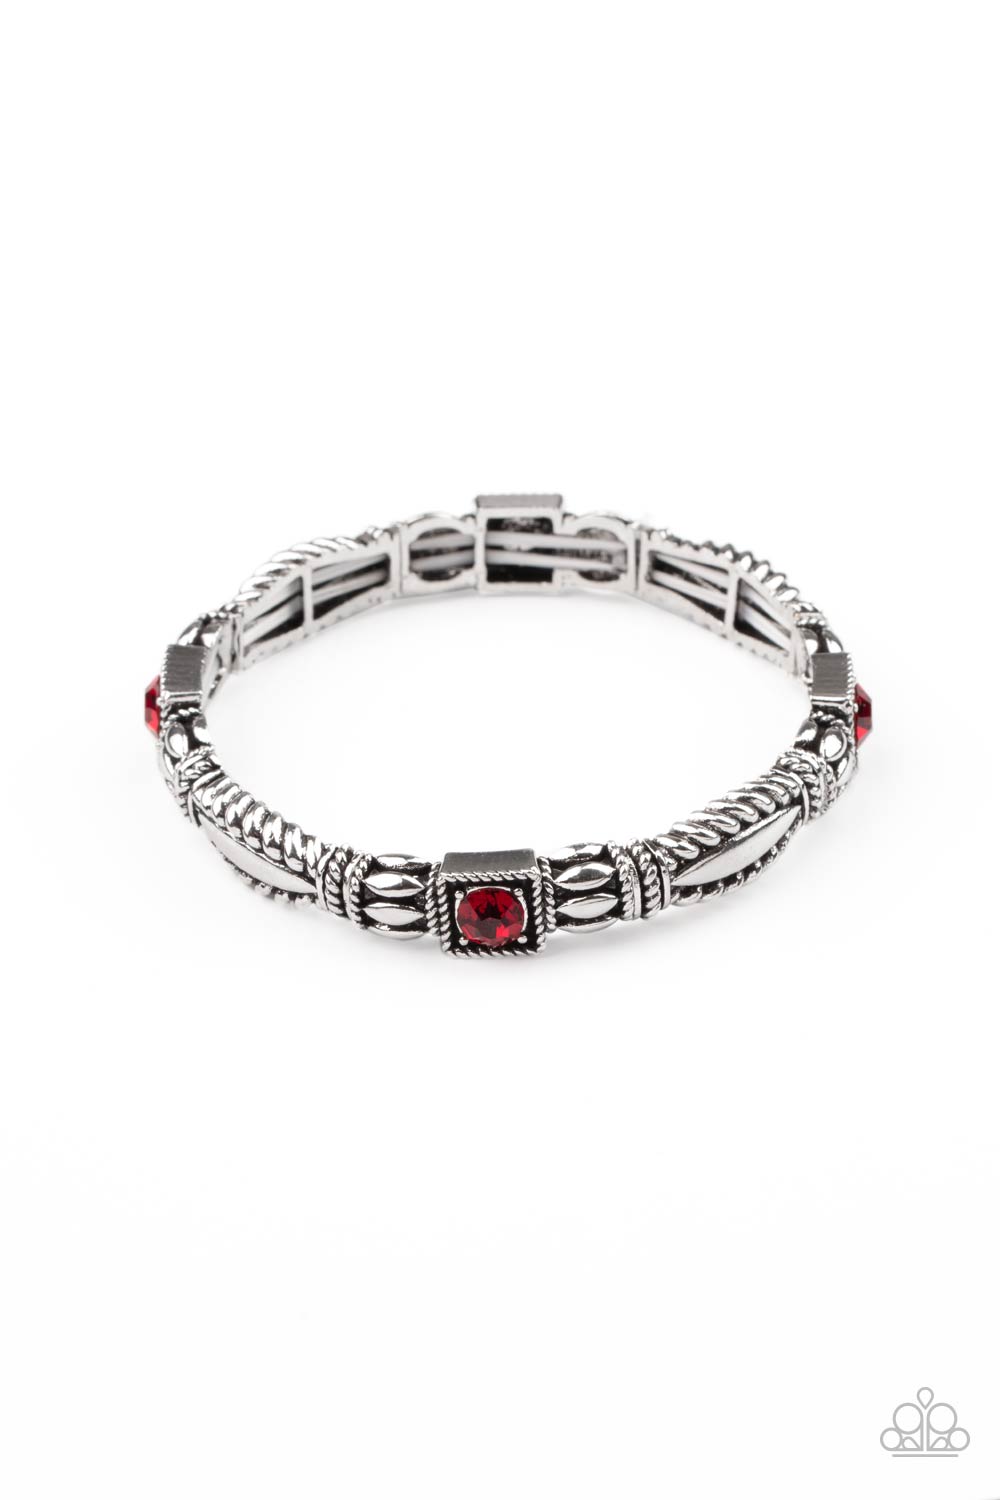 Paparazzi - Get This GLOW On The Road - Red Bracelet